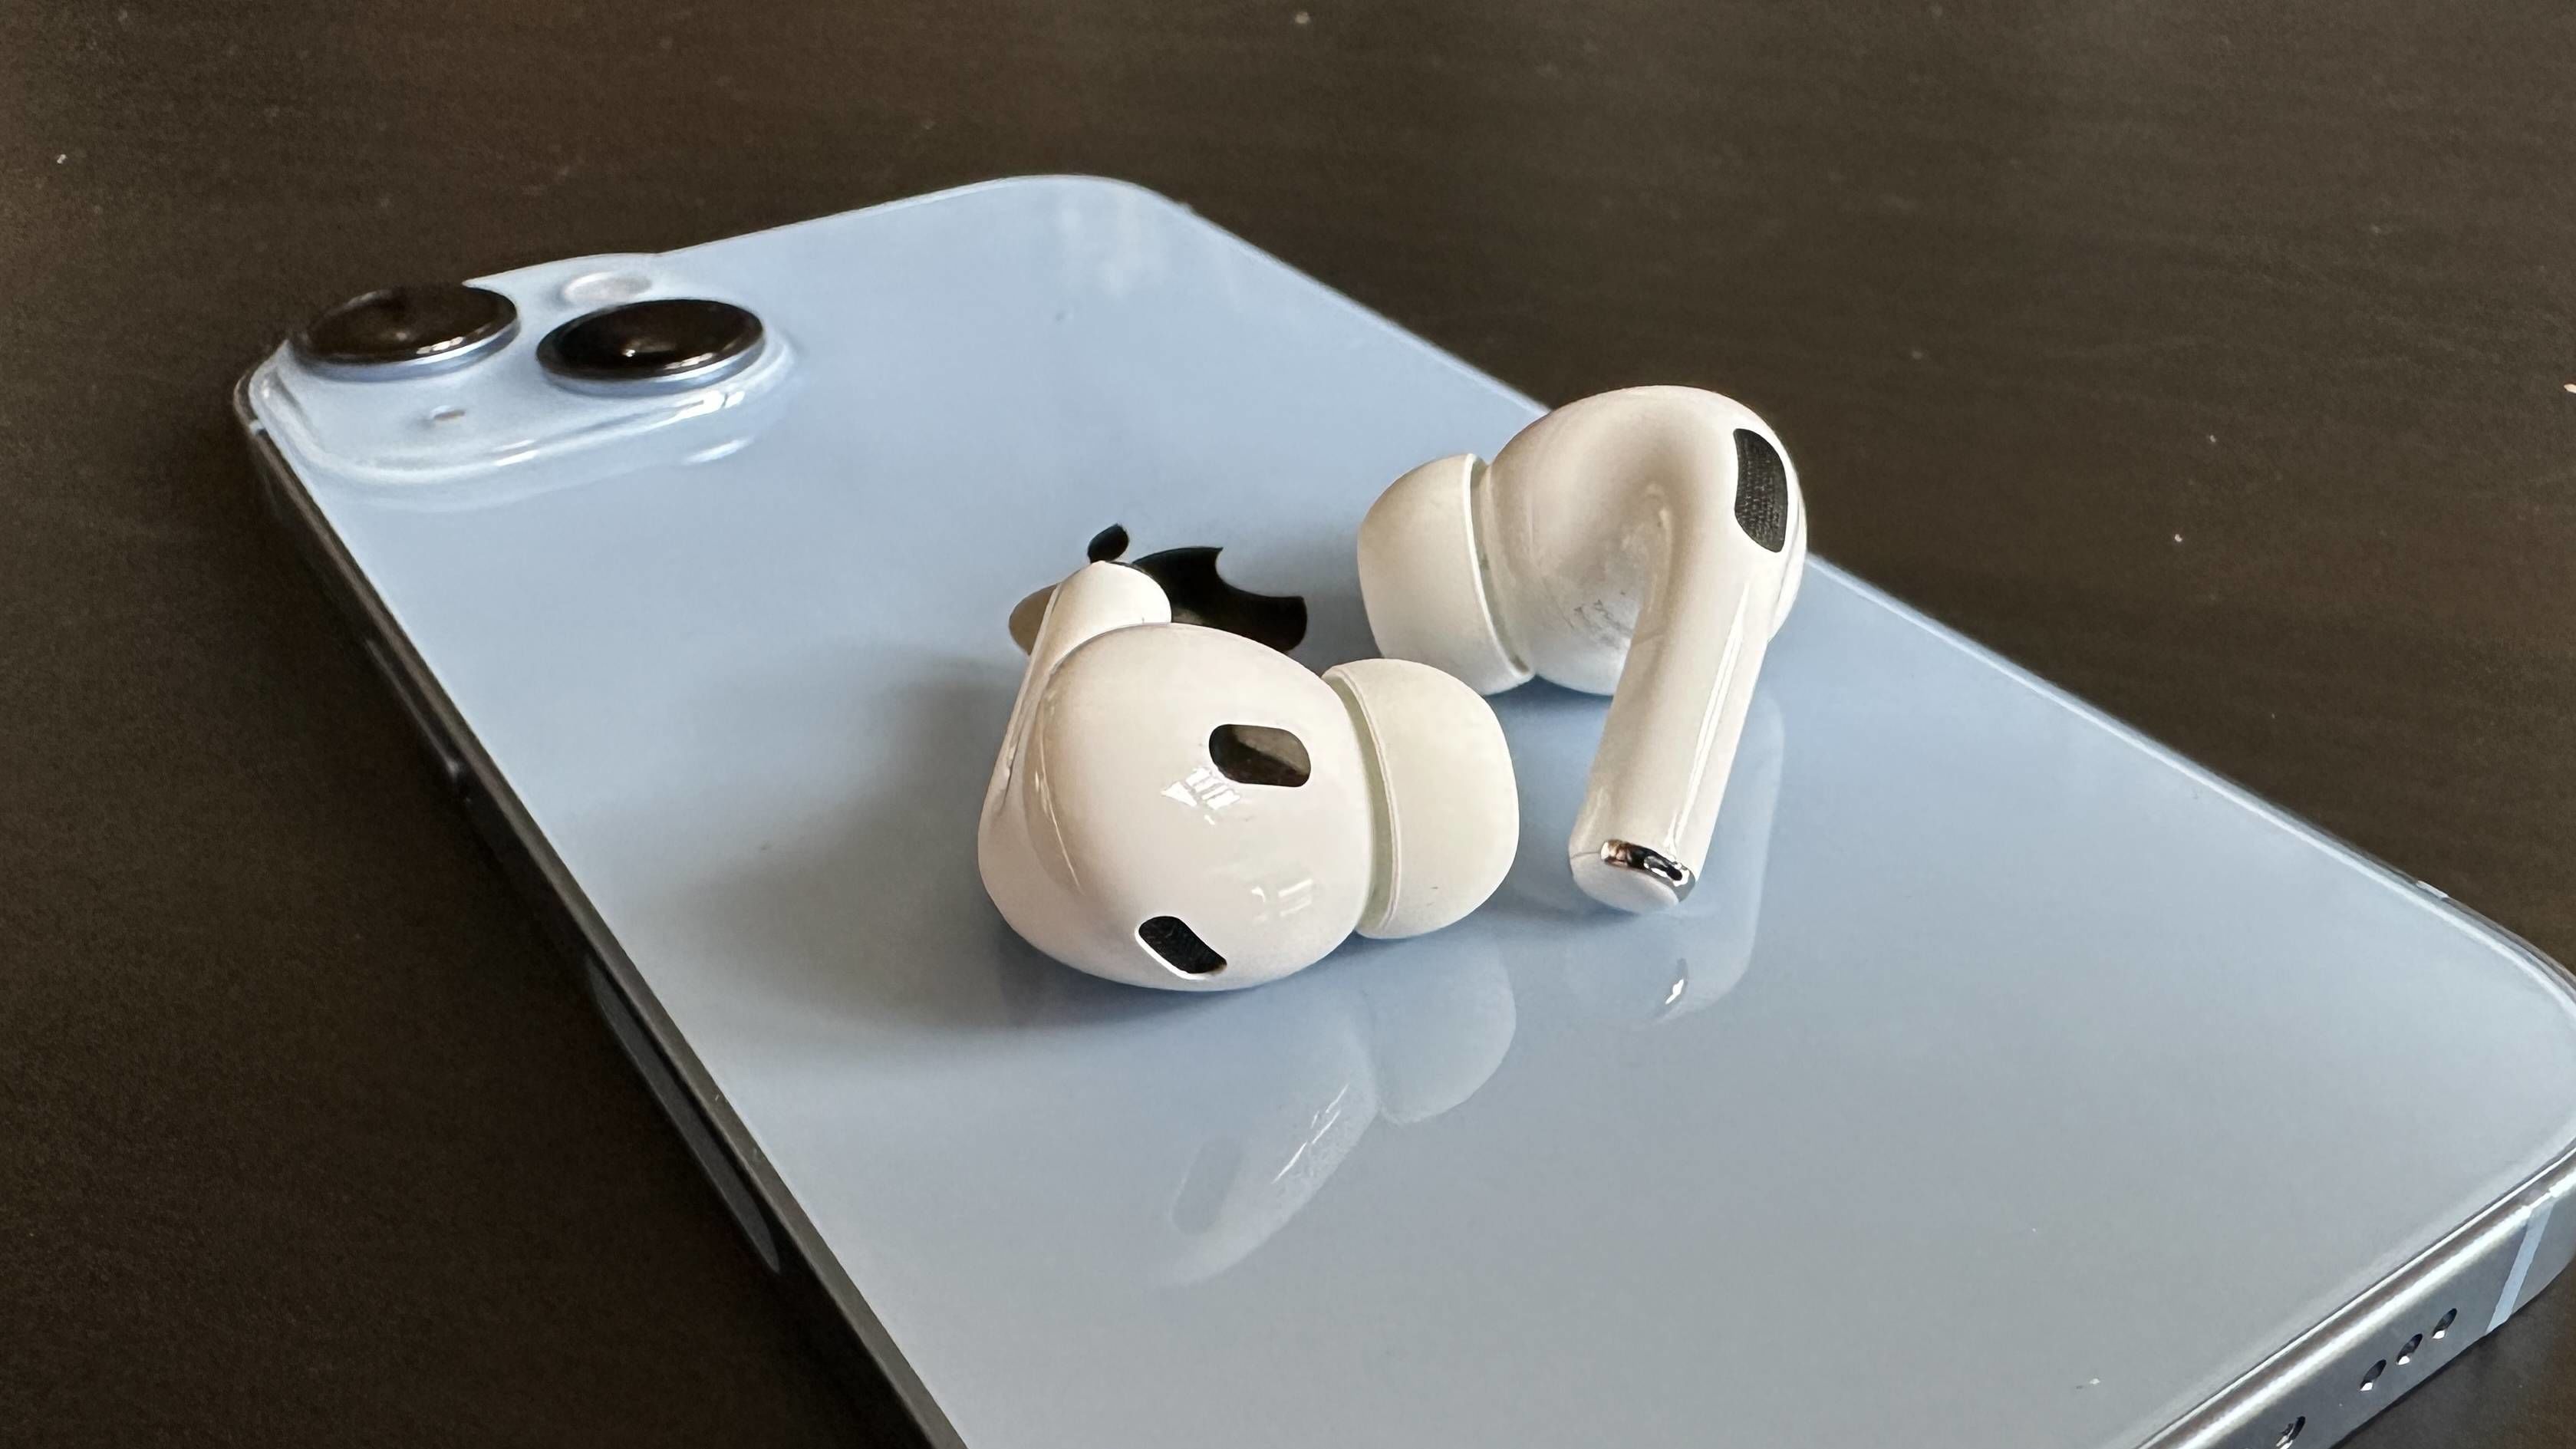 Compatible with iPhone Airpods Pro